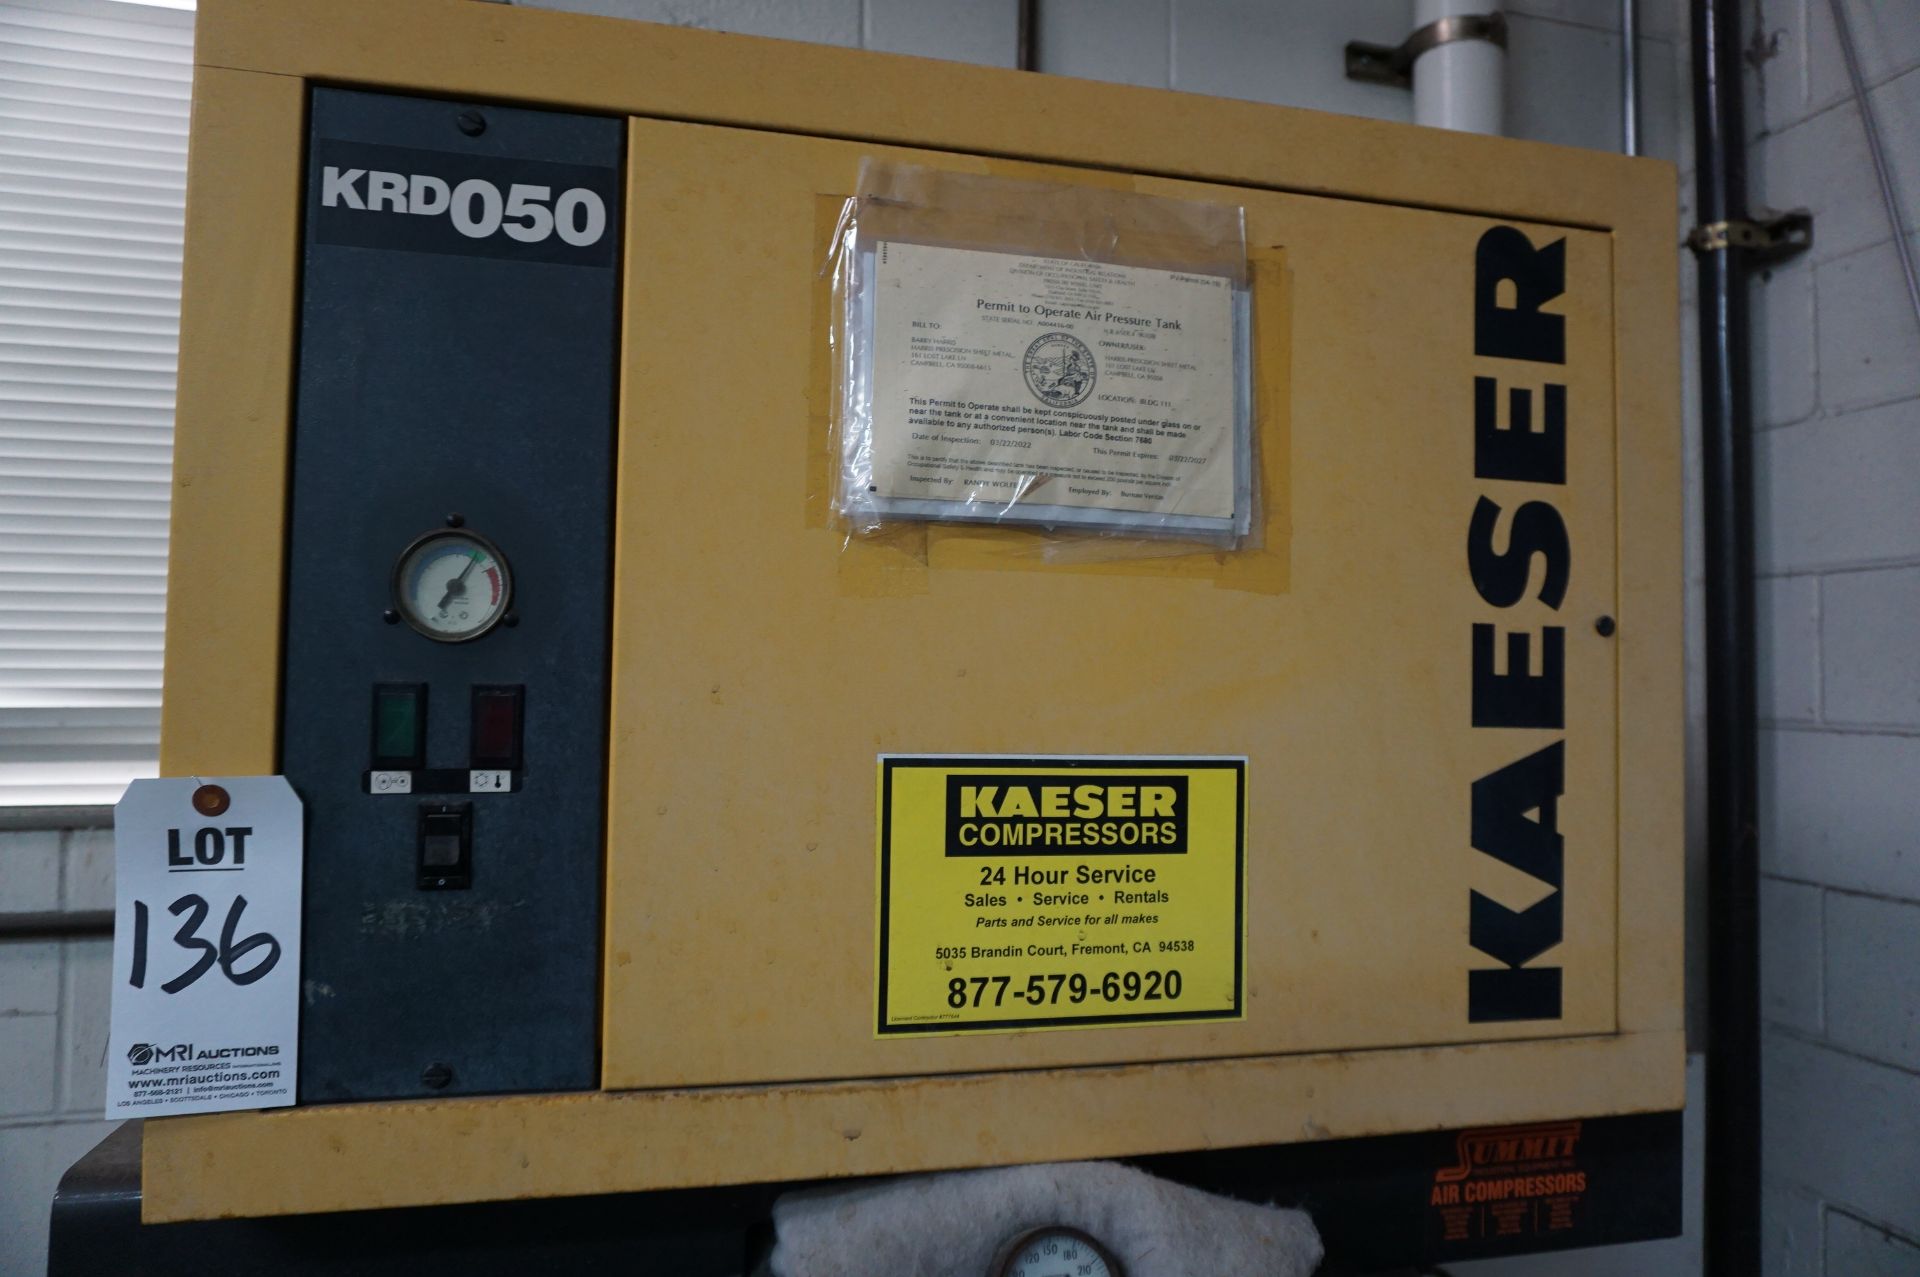 AIR COMPRESSOR LOT FOR POWDER COATING ROOM TO INCLUDE: (1) HAESER KRD050 AIR COMPRESSOR, AIR TANK, - Image 2 of 6